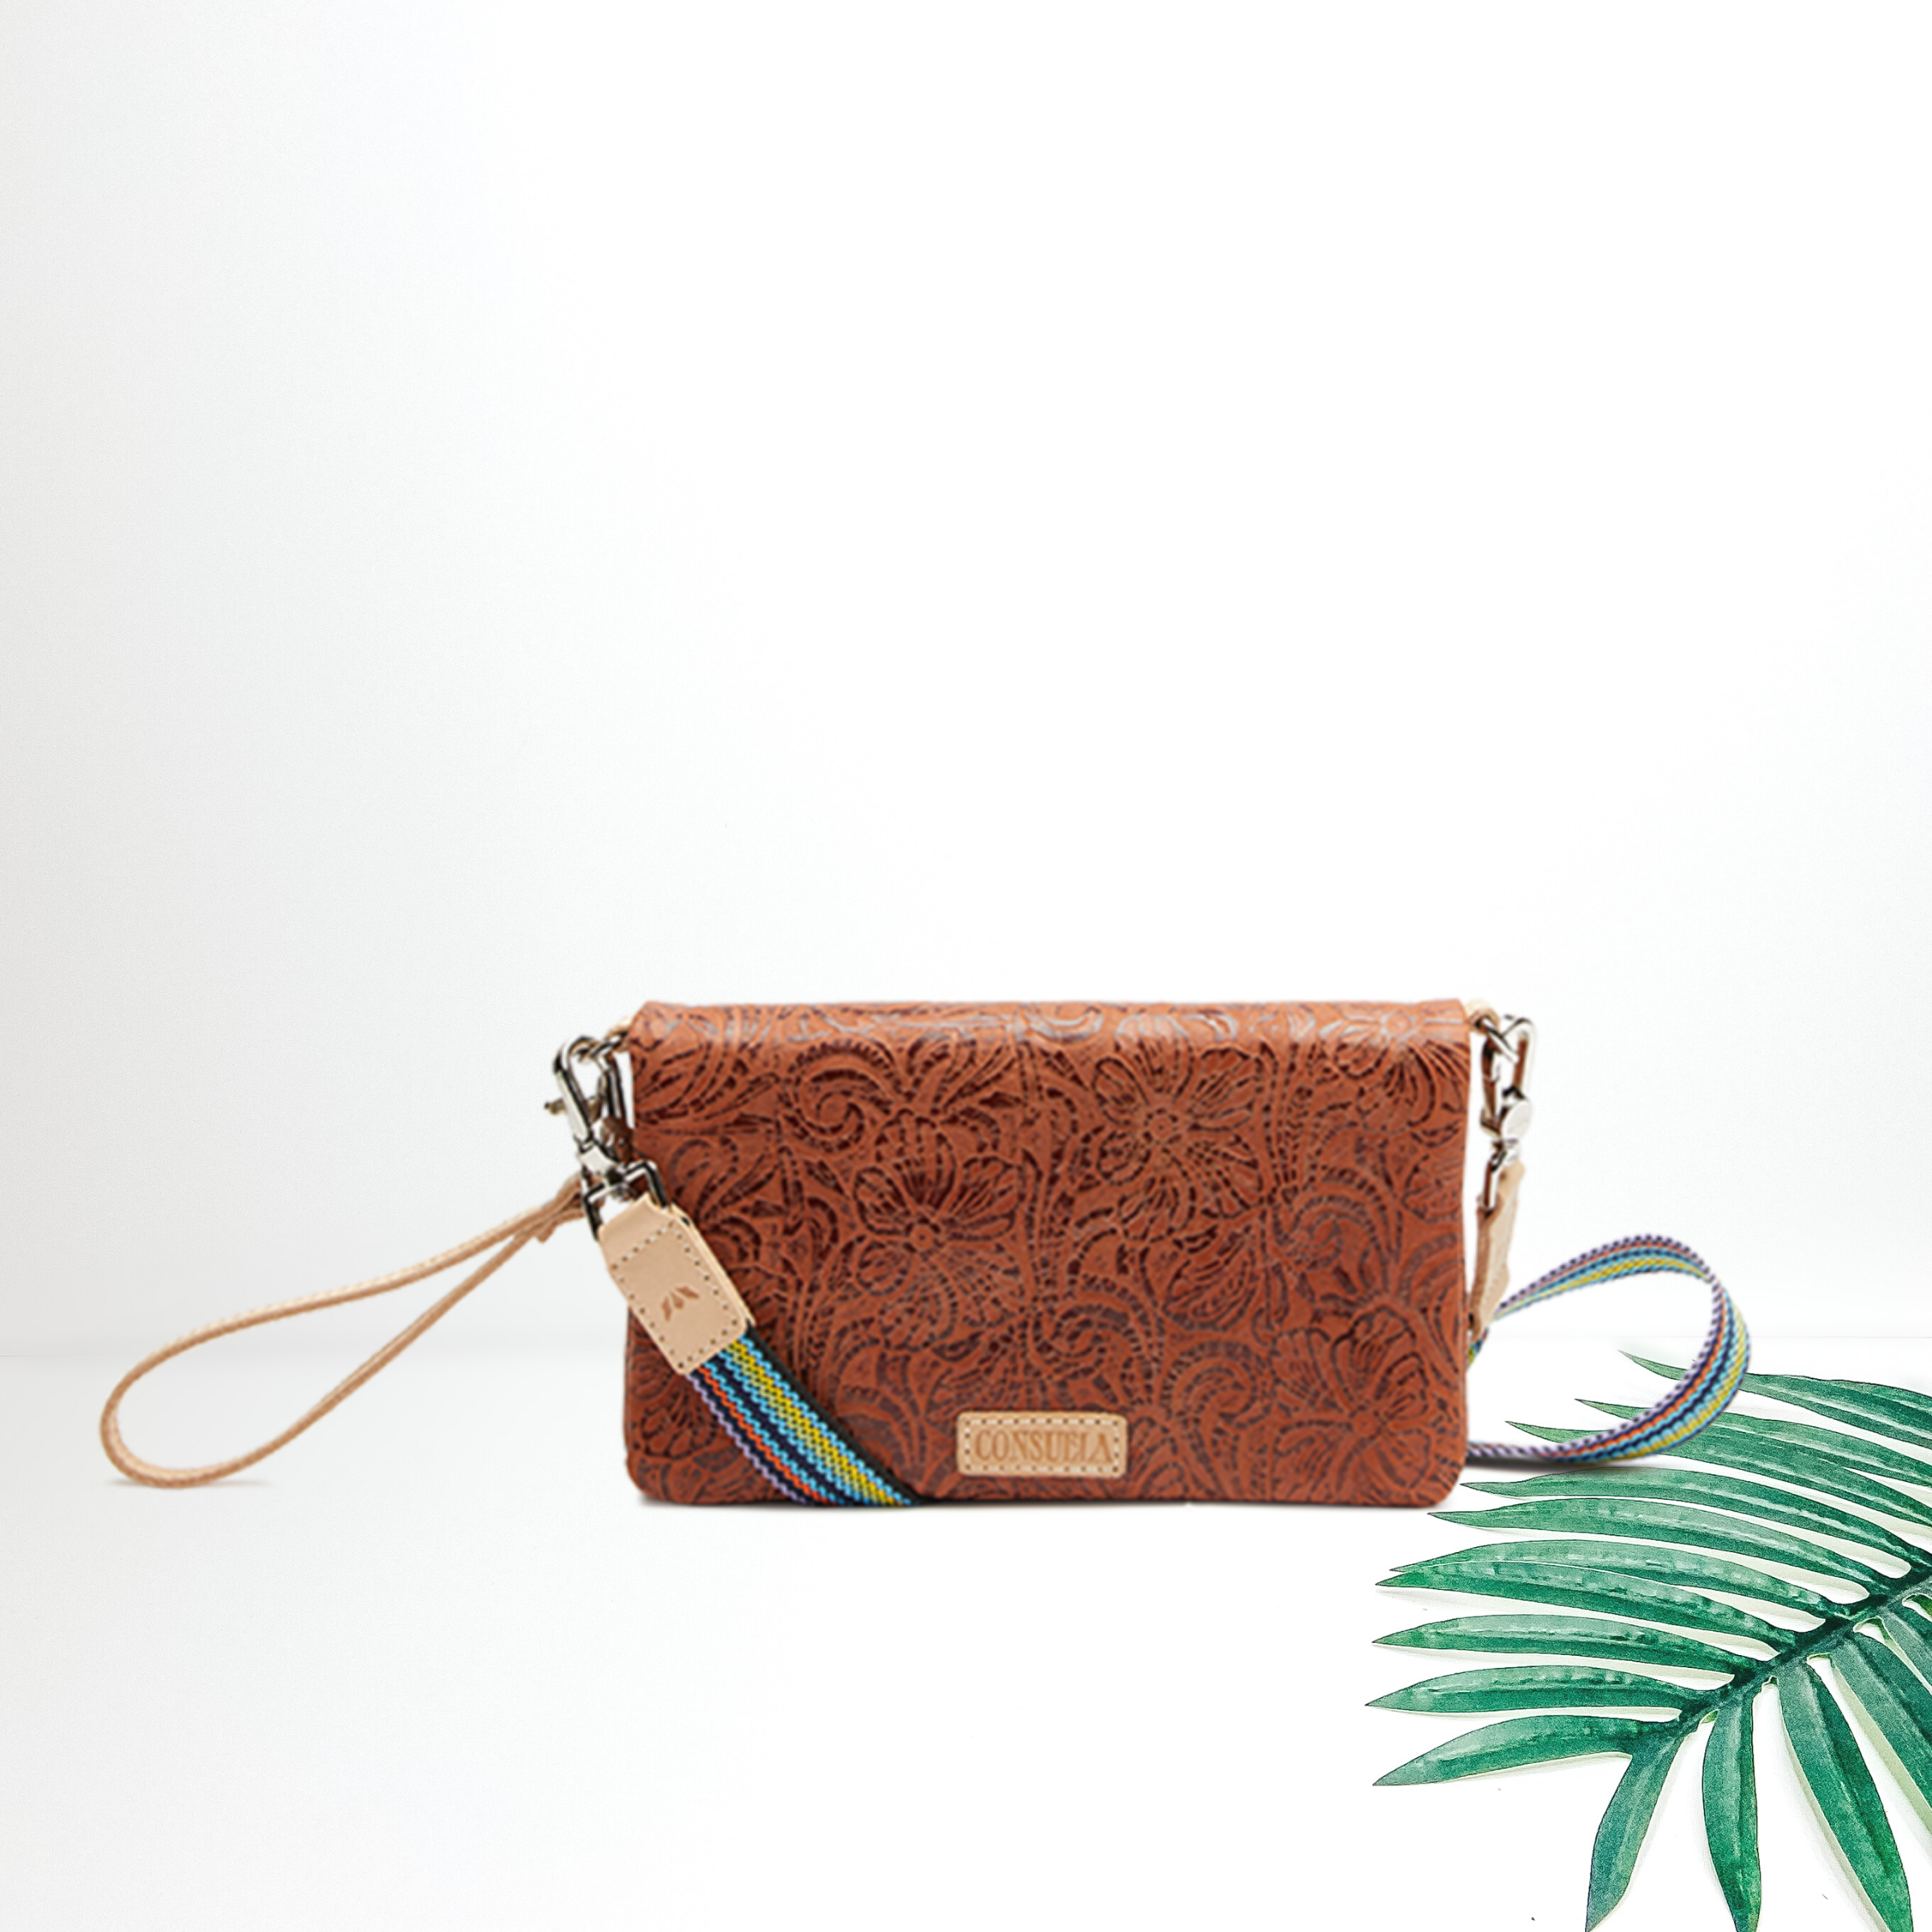 A tooled leather pattern crossbody purse pictured on a white background with a palm leaf.